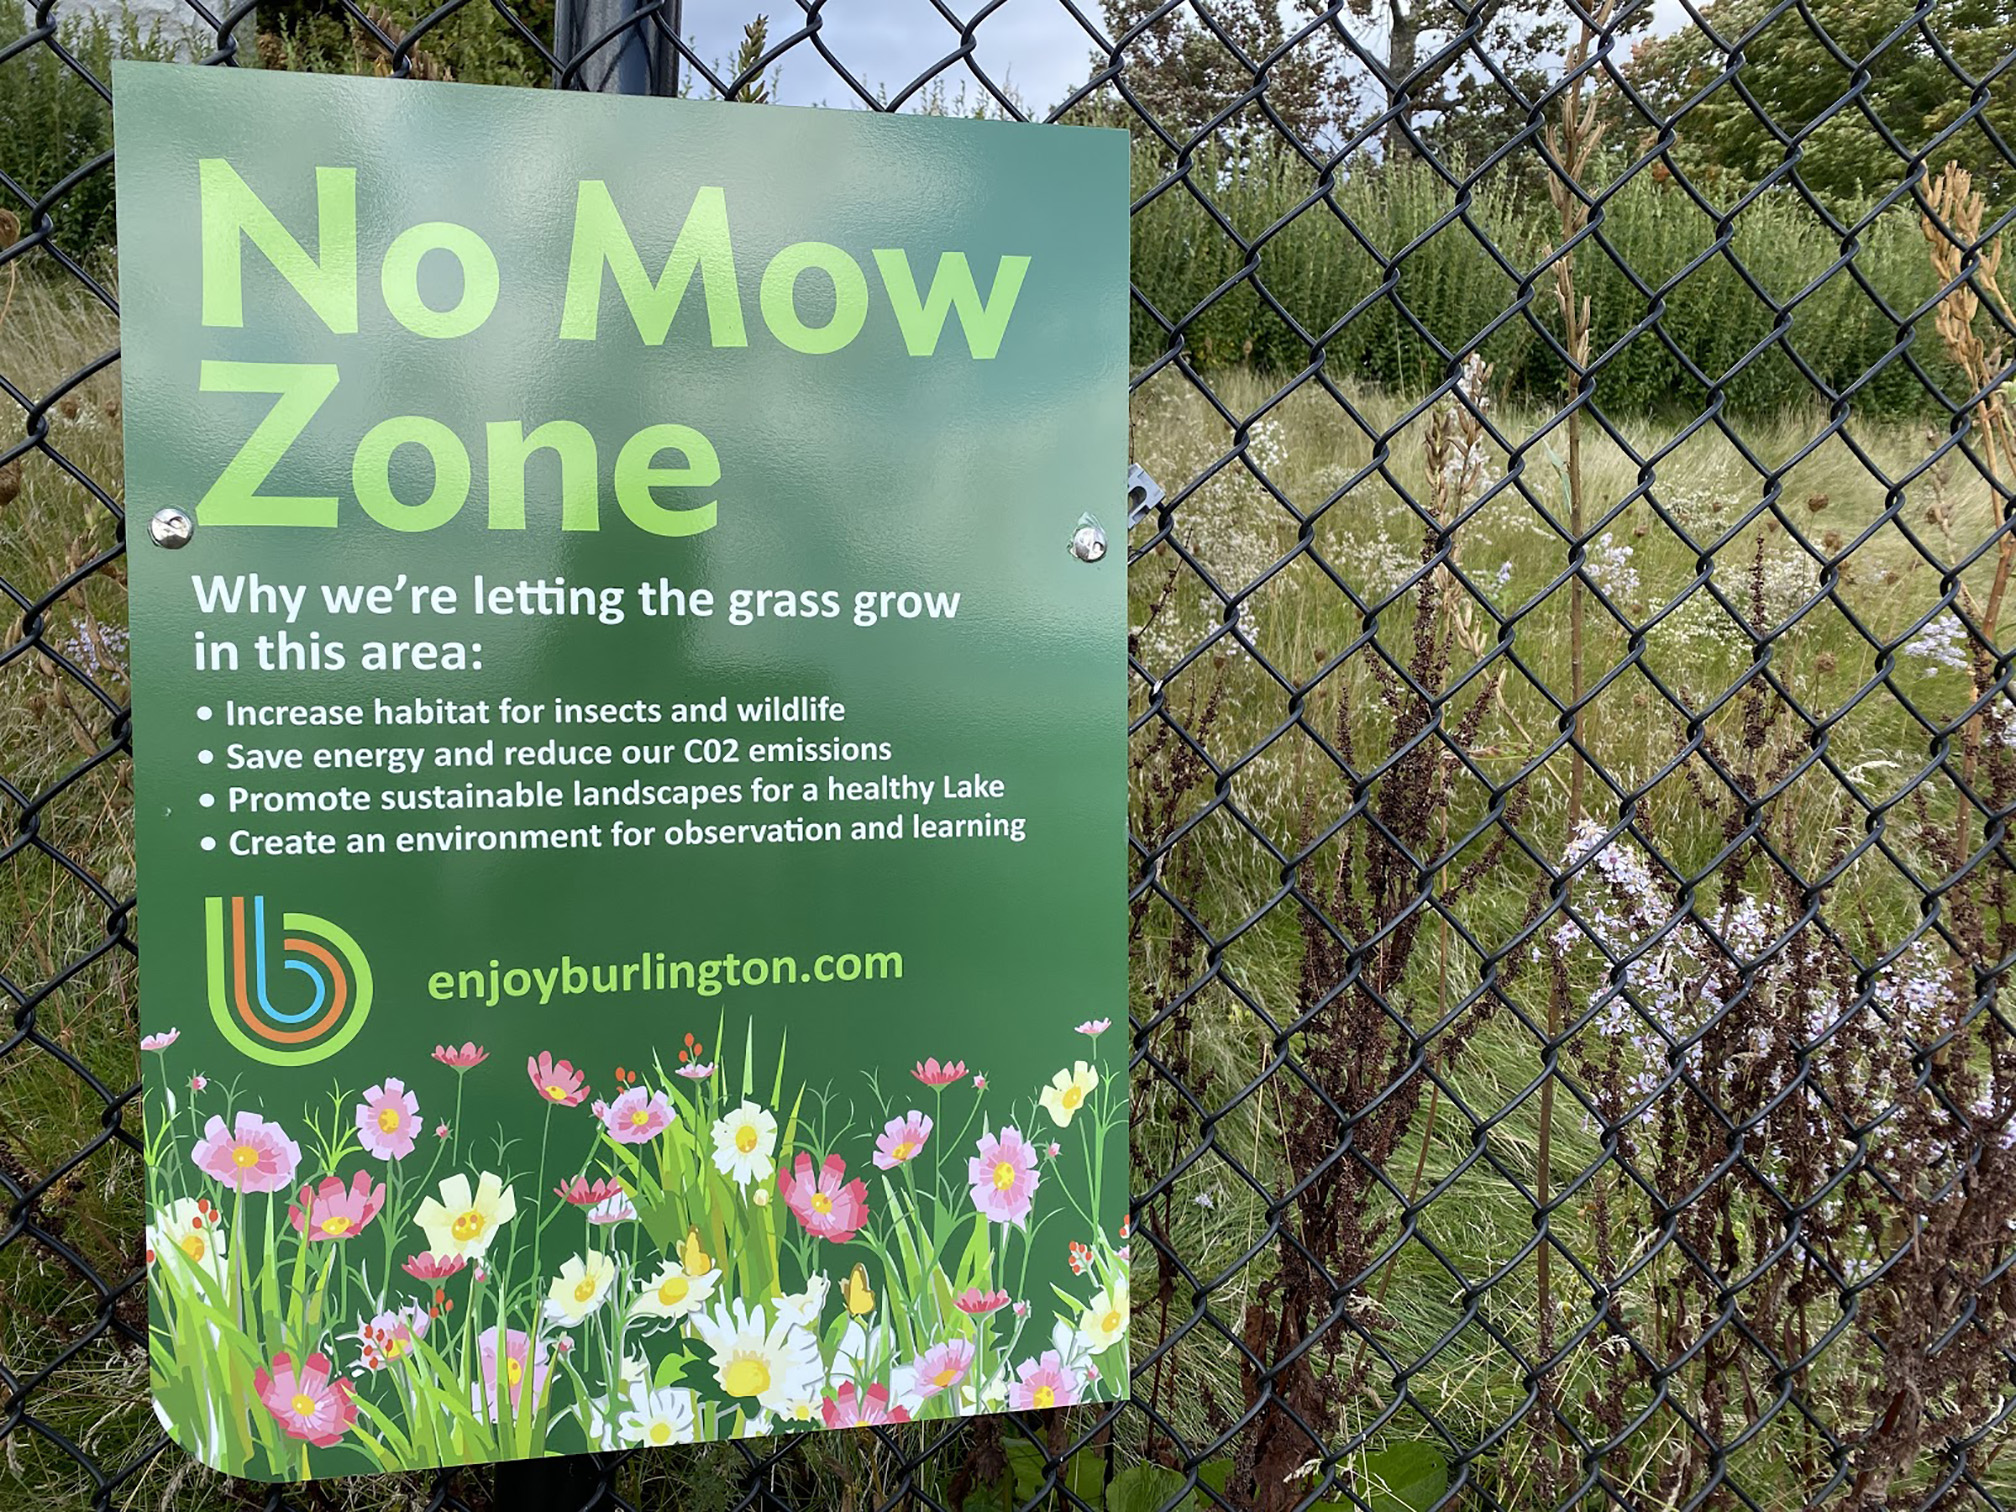 A green sign hangs on a fence. The sign says "No Mow Zone" and includes illustrations of pink and white flowers